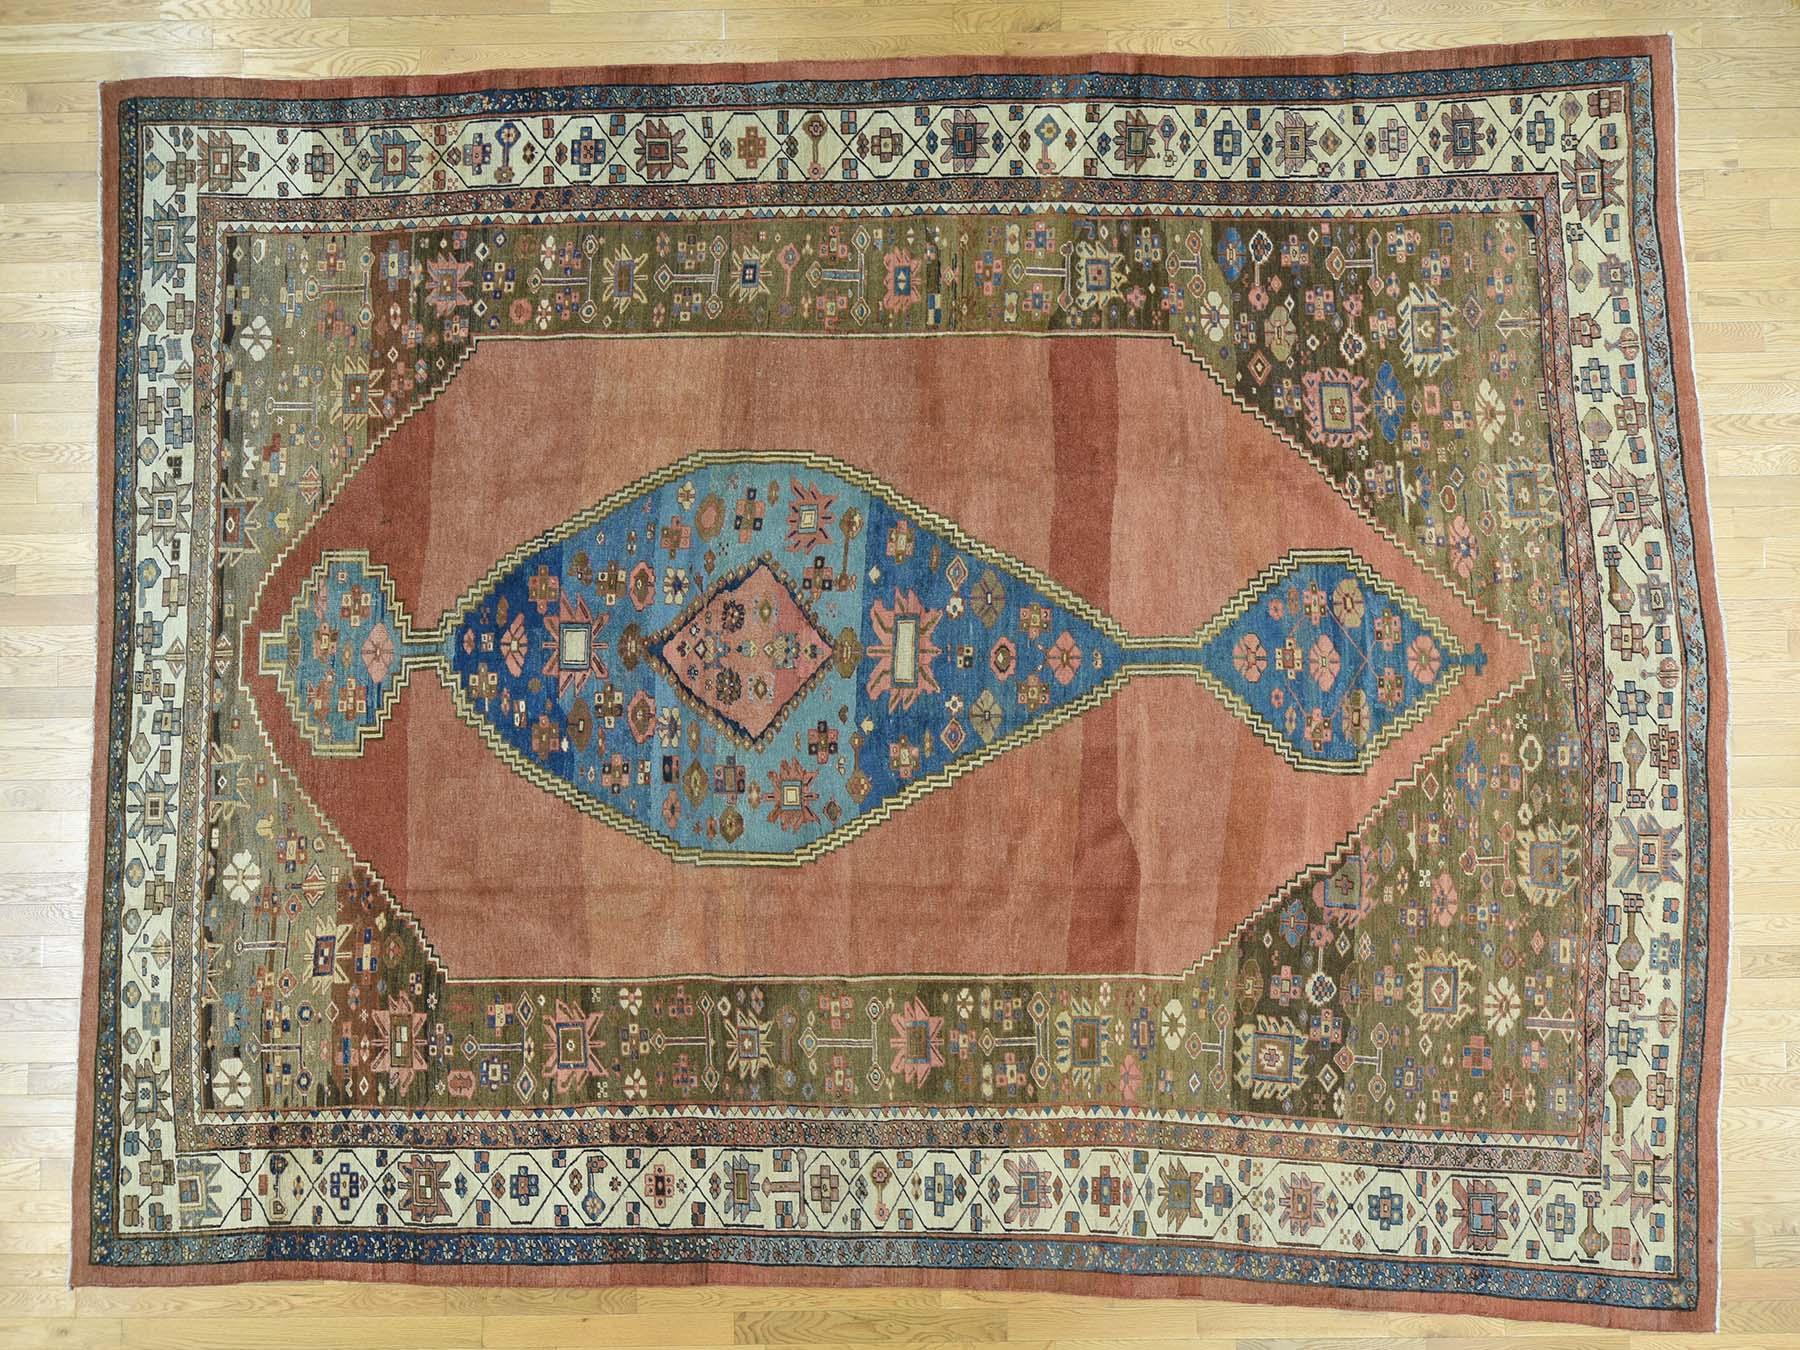 This is a genuine hand knotted oriental rug. It is not hand tufted or machine made rug. Our entire inventory is made of either hand-knotted or hand-woven rugs.

Decorate your home with this high quality handmade carpet. This handcrafted original